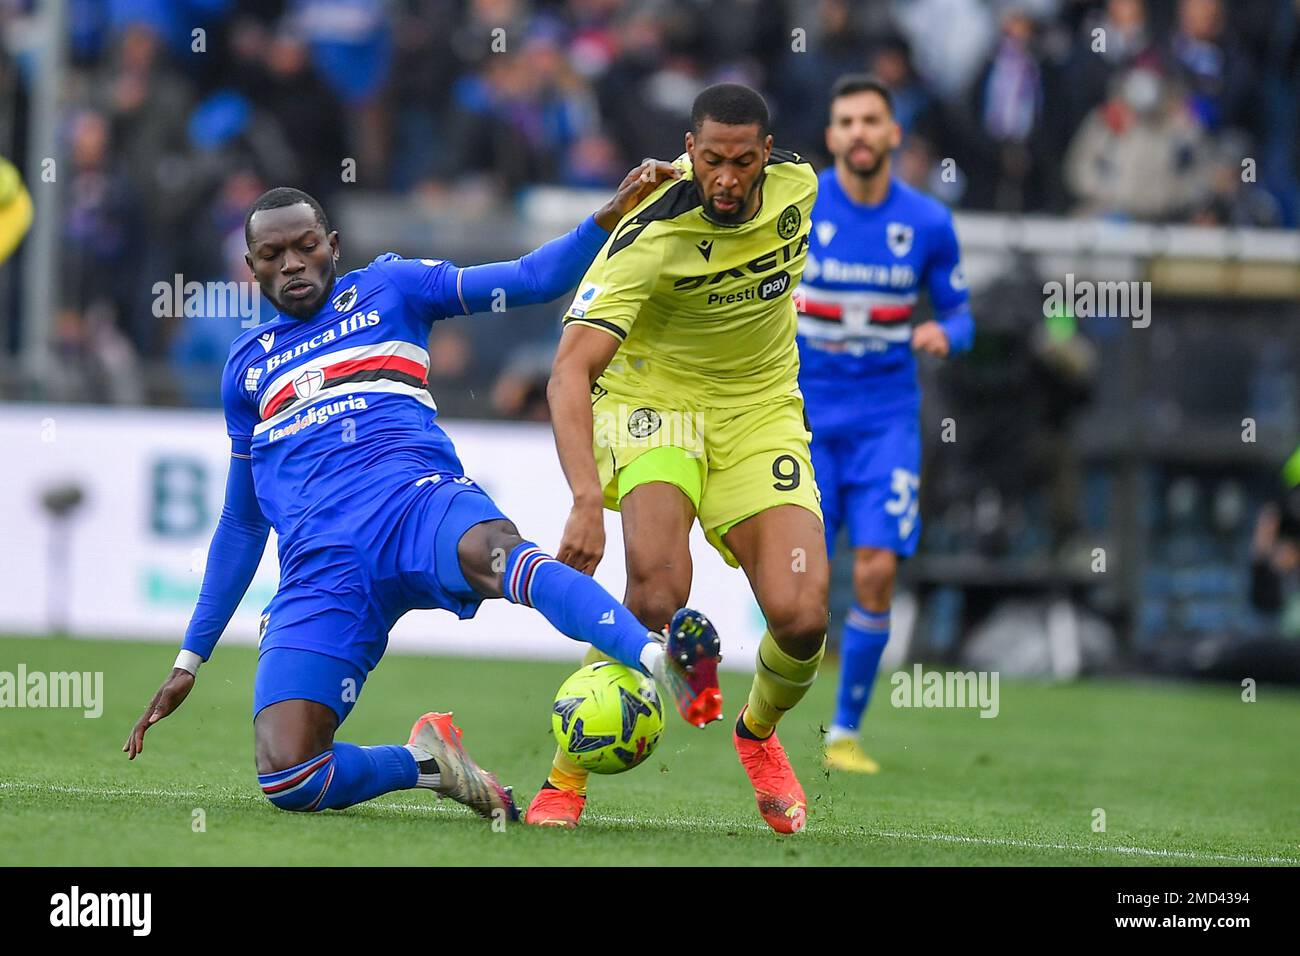 Genova, Italy. 22nd Jan, 2023. Omar Colley (Sampdoria) - Norberto Bercique Gomes Betuncal, detto Beto (Udinese) during UC Sampdoria vs Udinese Calcio, italian soccer Serie A match in Genova, Italy, January 22 2023 Credit: Independent Photo Agency/Alamy Live News Stock Photo